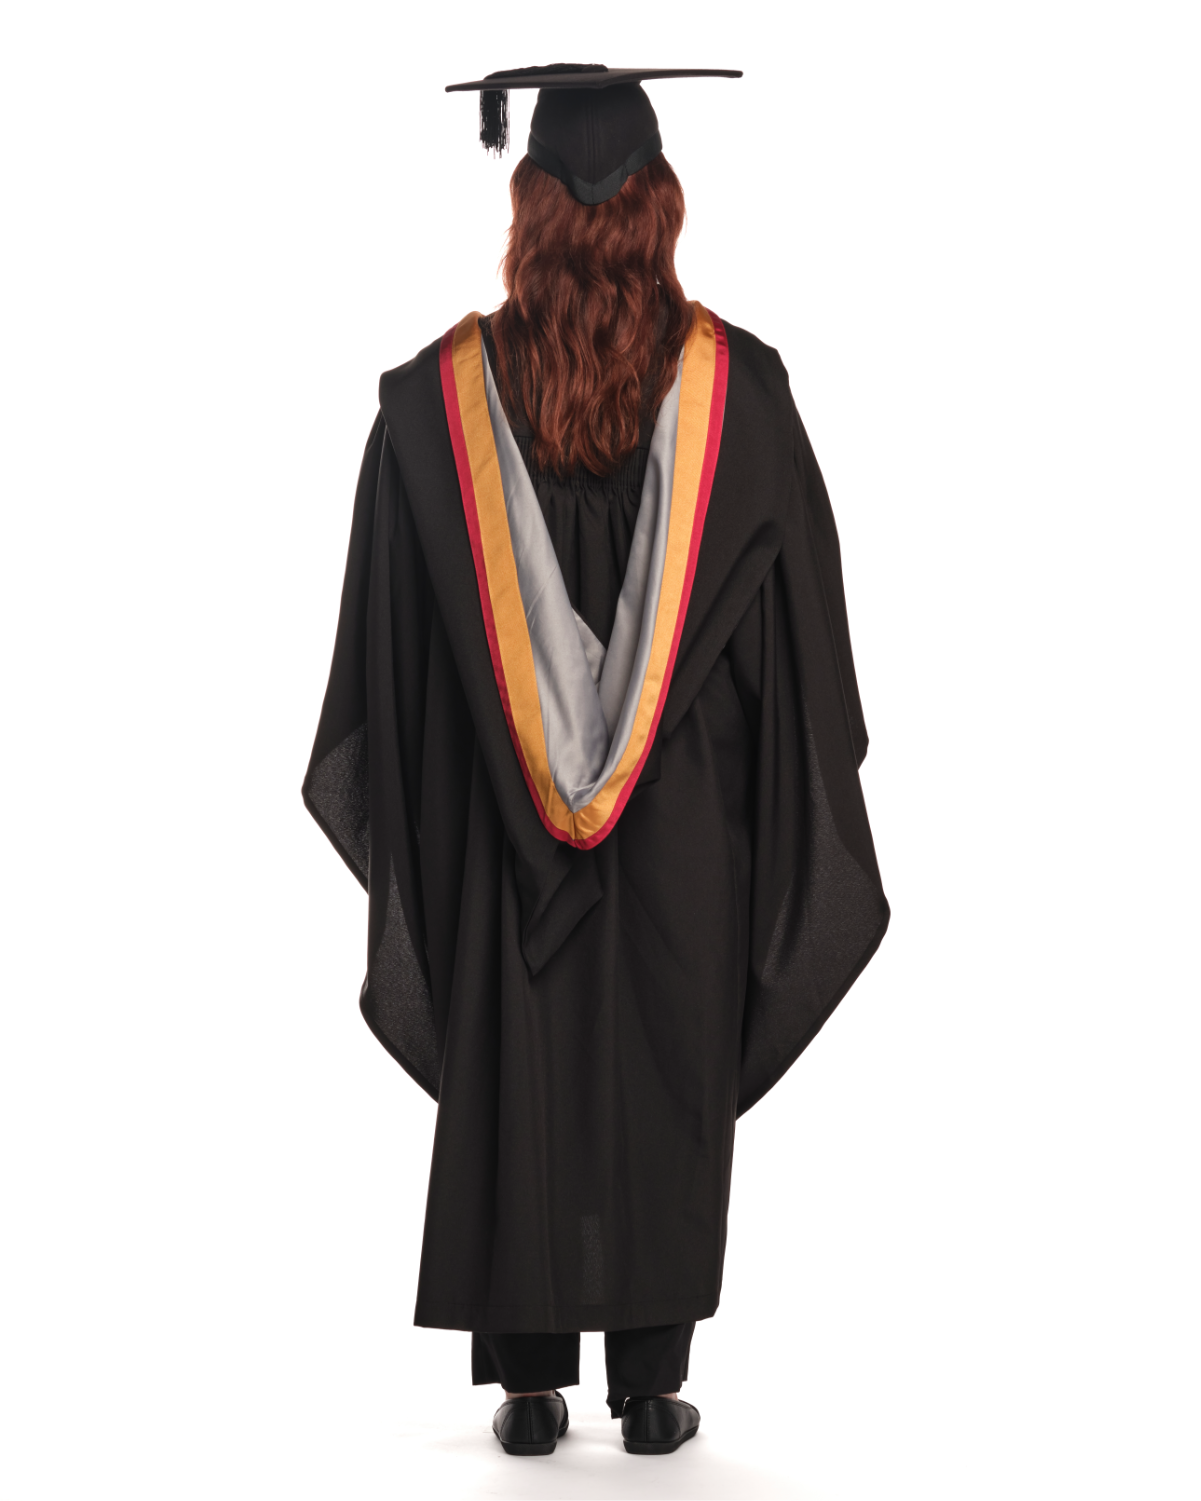 Lancaster University | MSci | Integrated Master of Science Gown, Cap and Hood Set